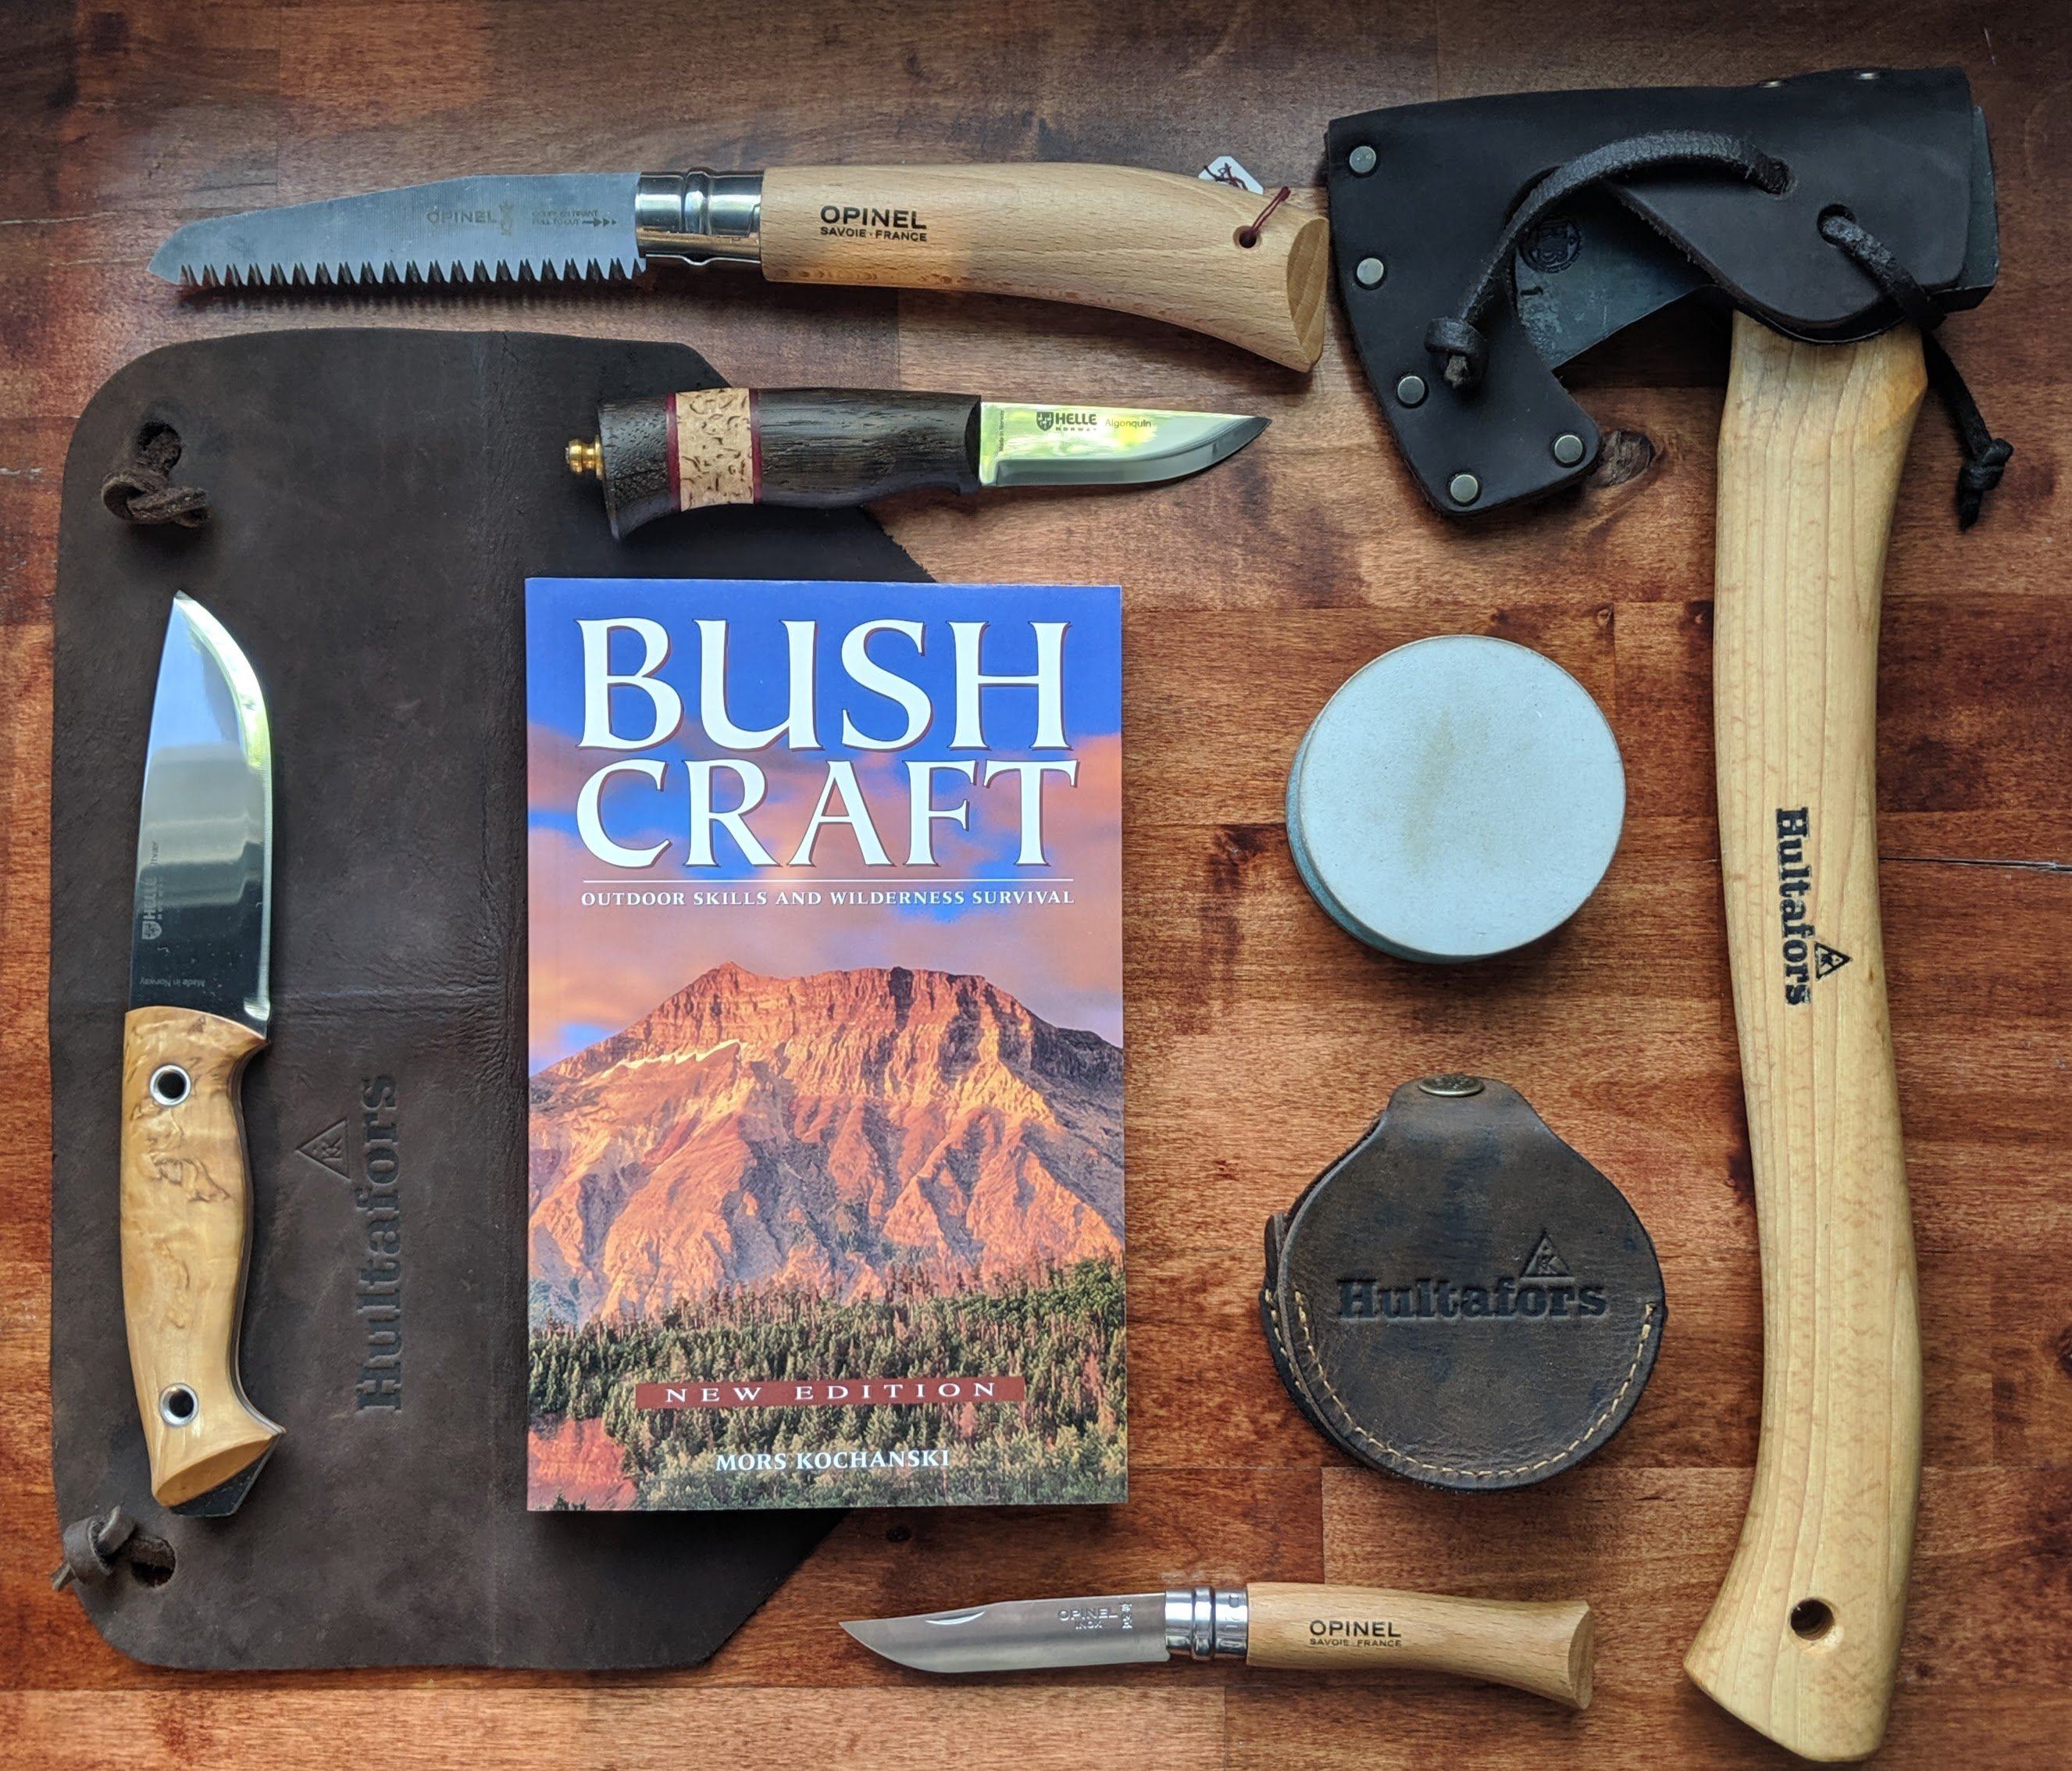 Bushcraft - Outdoor Skills and Wilderness Survival by Mors